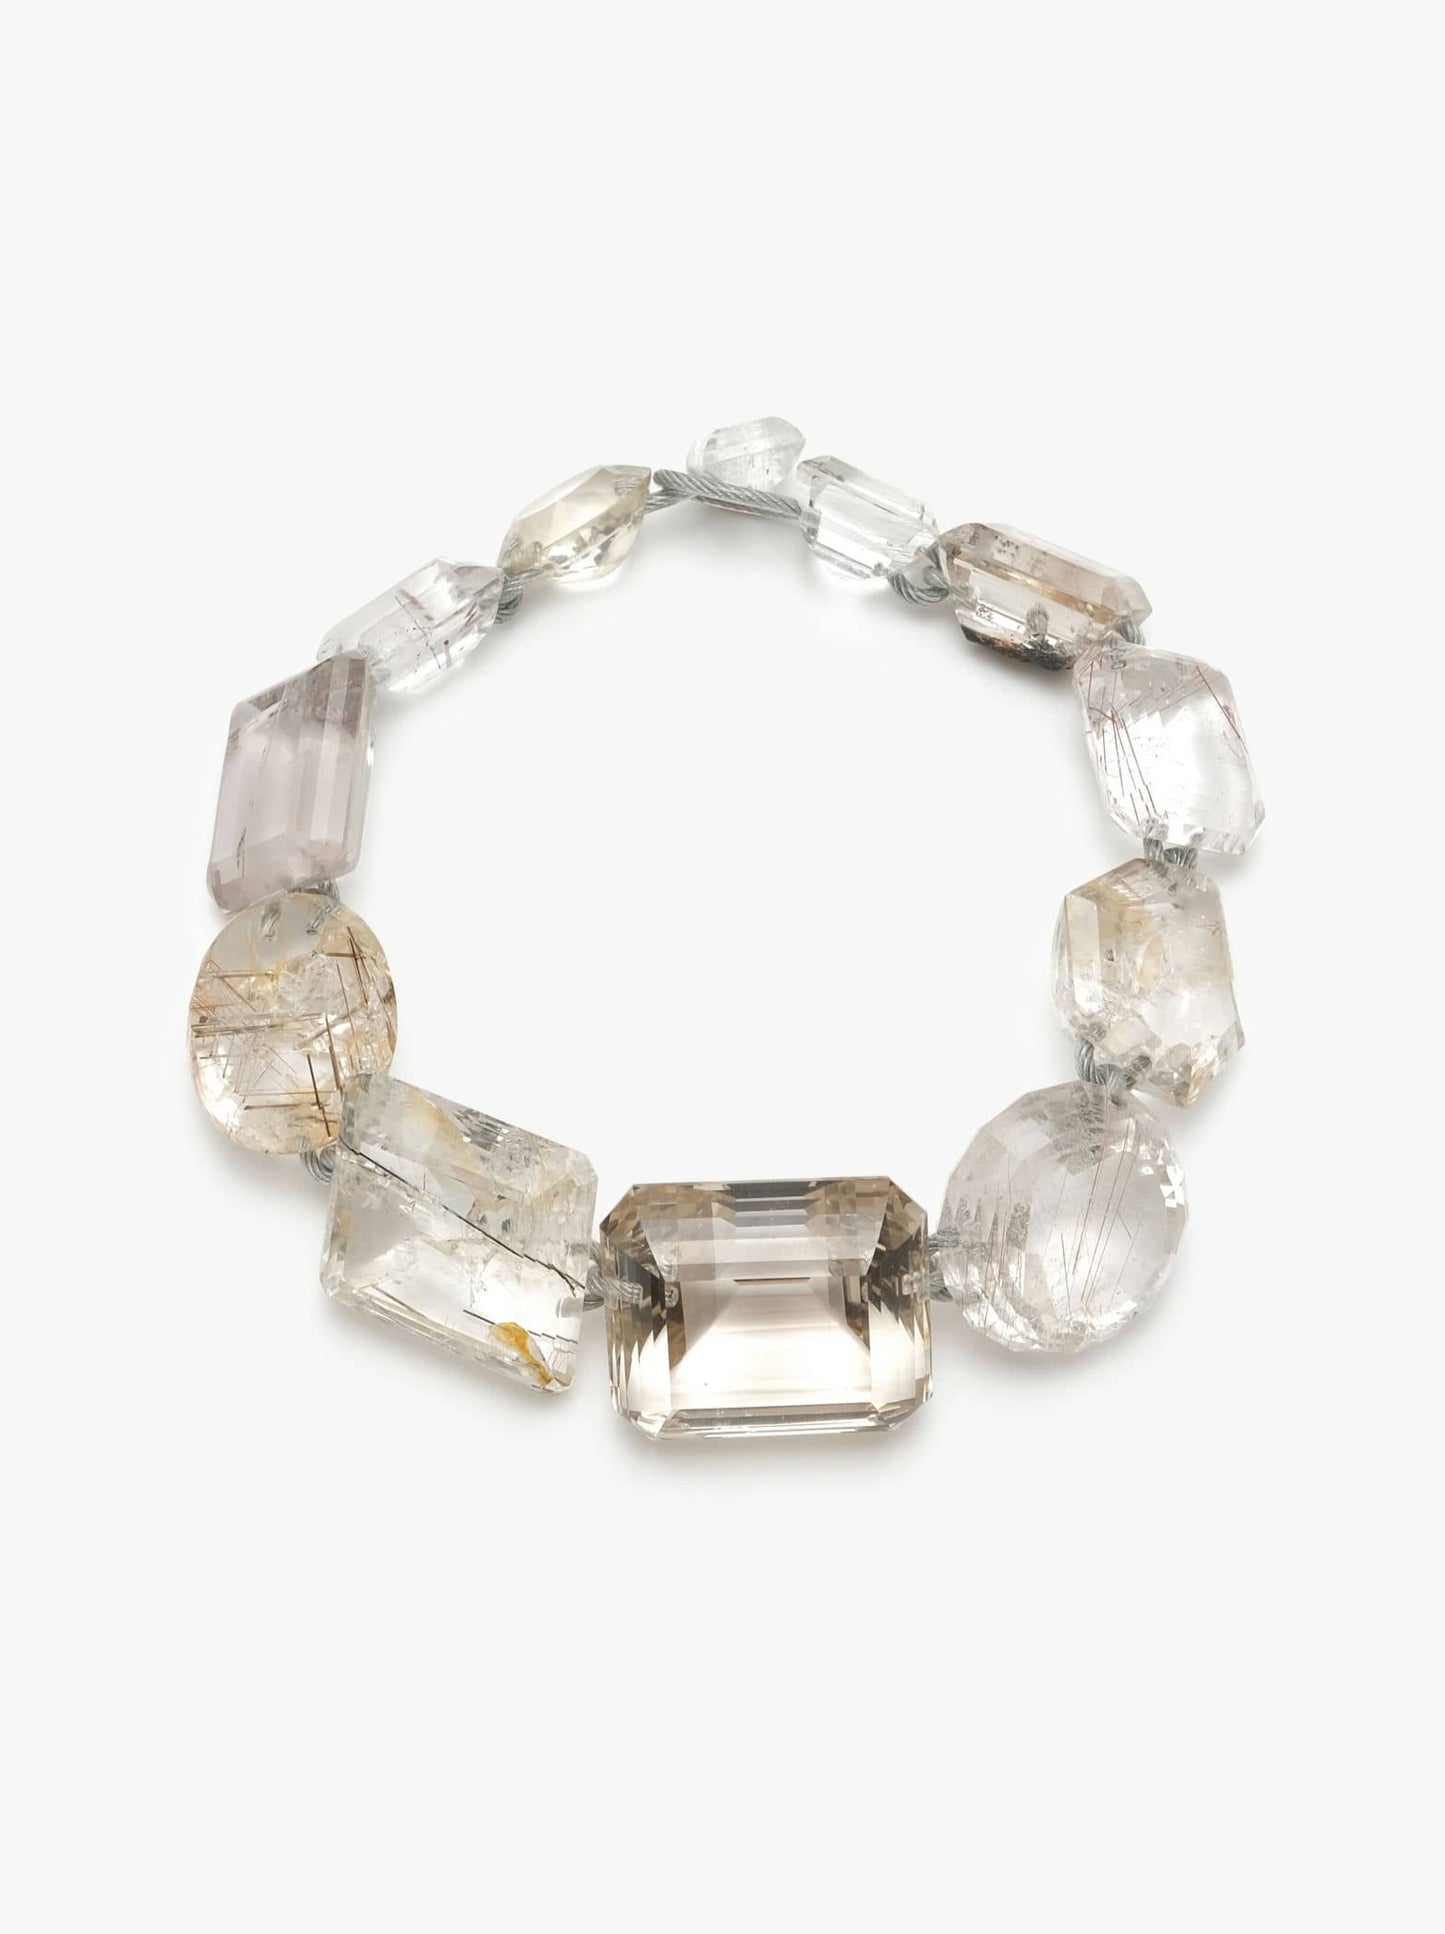 50th anniversary necklace: mountain crystal, ruthilated quartz